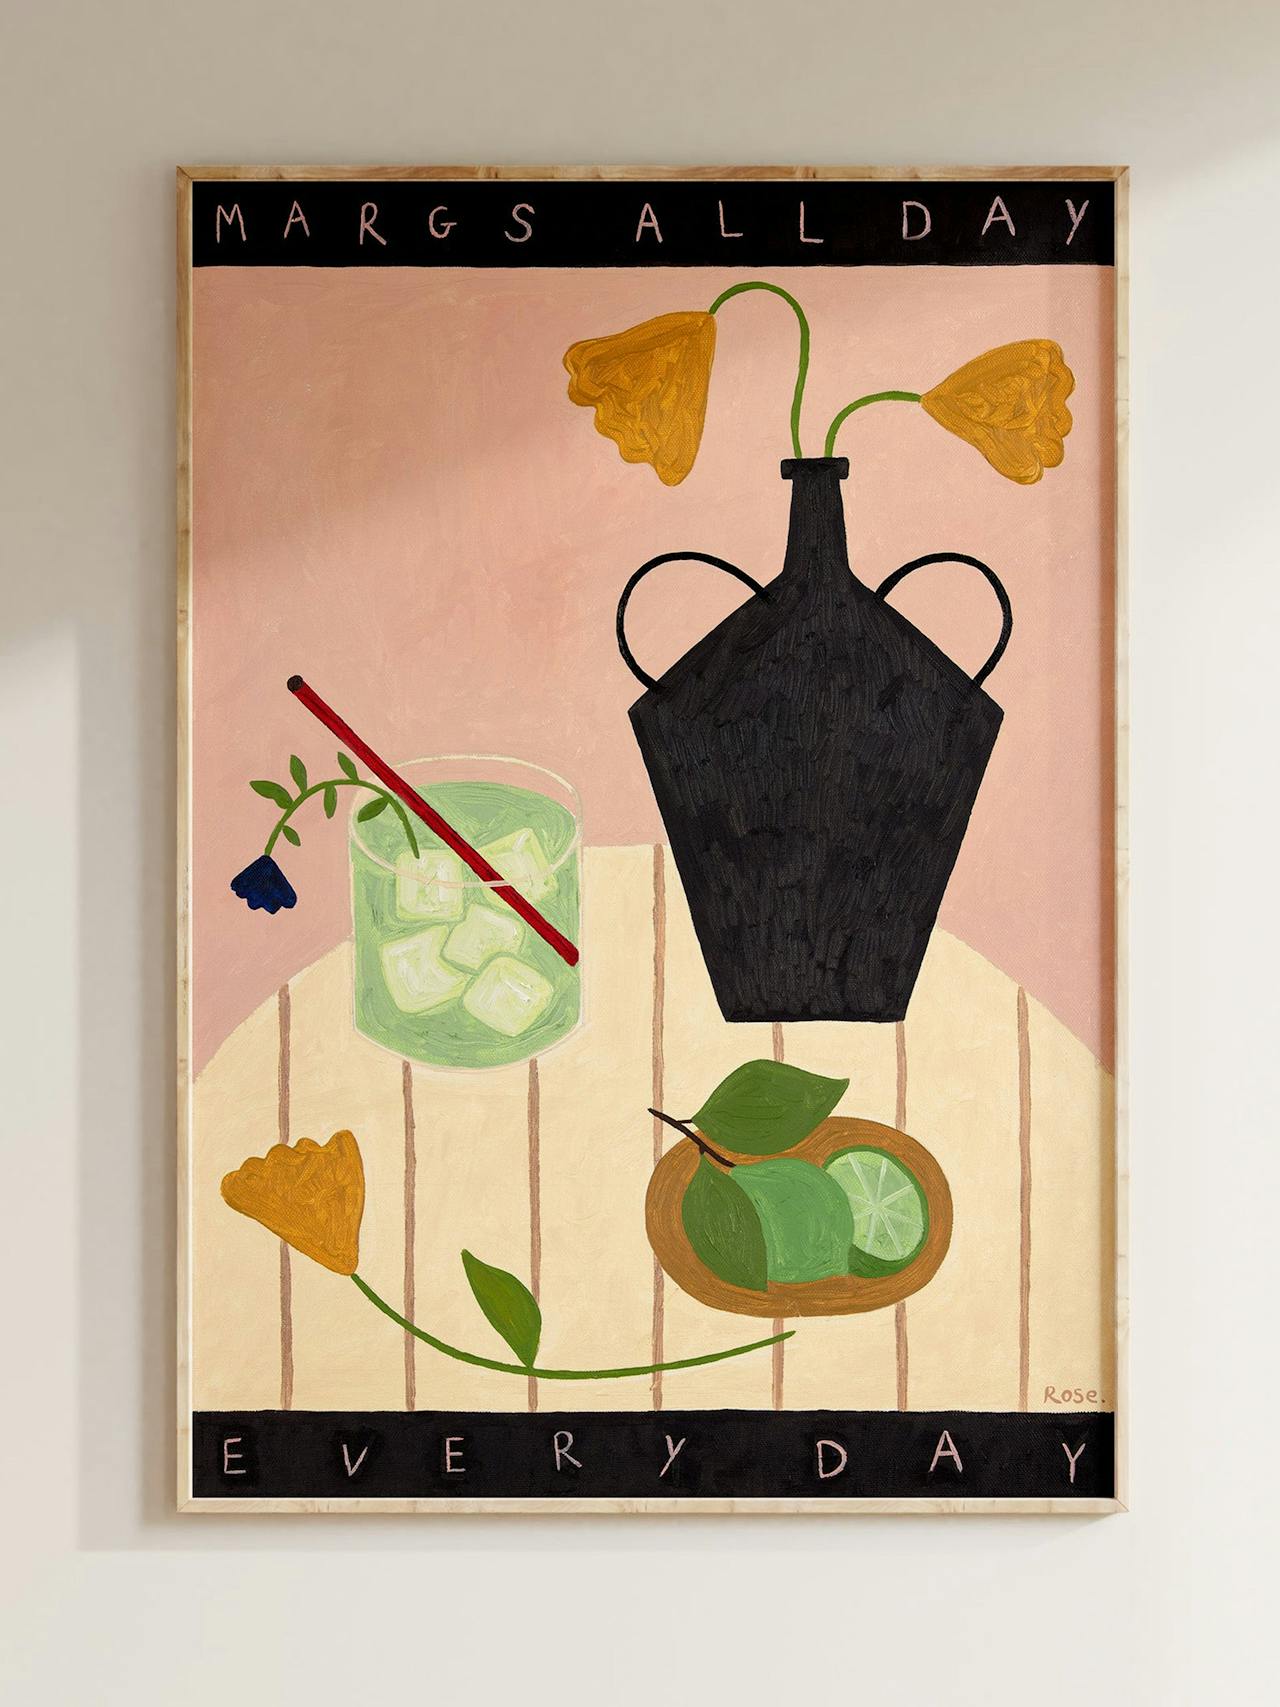 Margs All Day fine art print